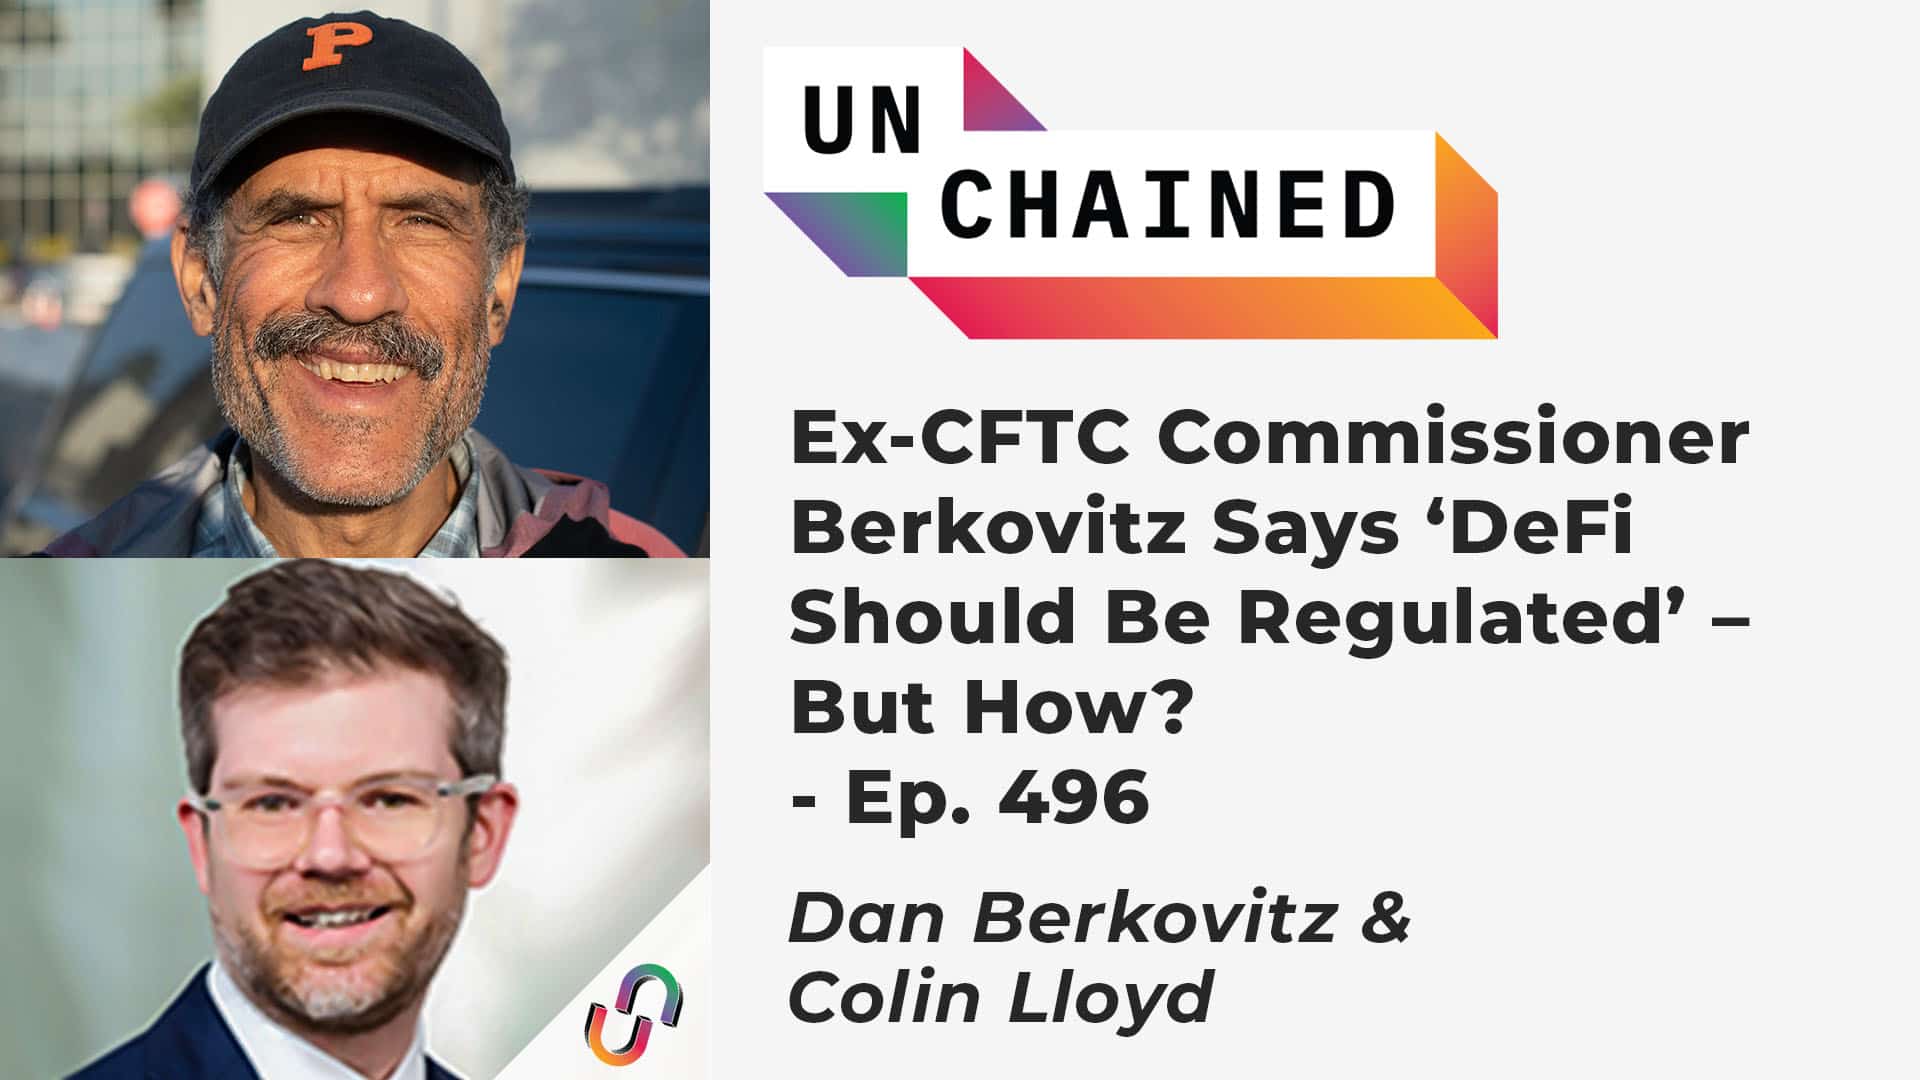 Ex-CFTC Commissioner Berkovitz Says ‘DeFi Should Be Regulated’ – But How? - Ep. 496